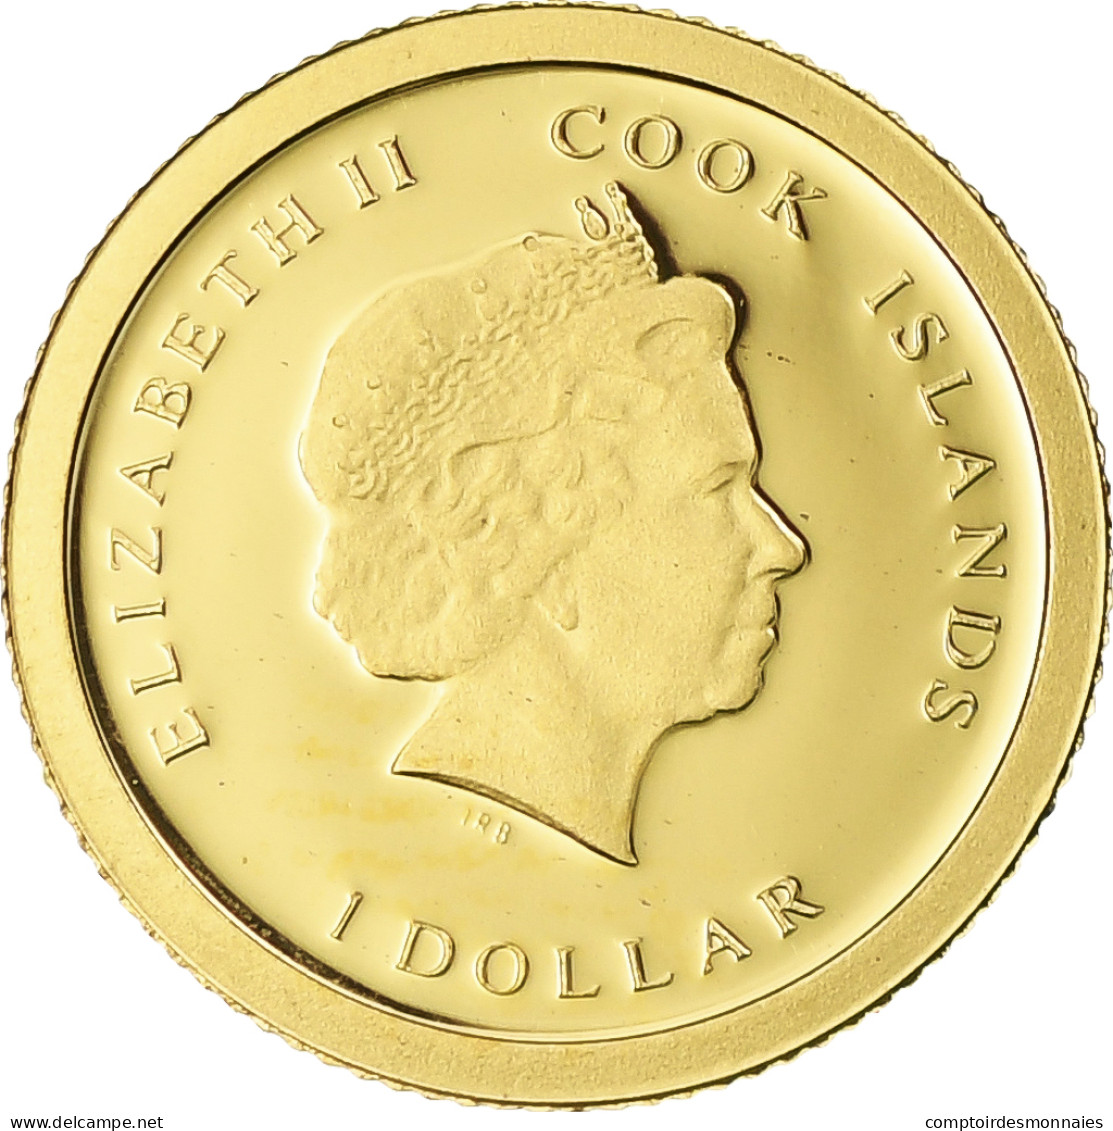 Îles Cook, Pape François, 1 Dollar, 2013, Proof / BE, FDC, Or - Cook Islands